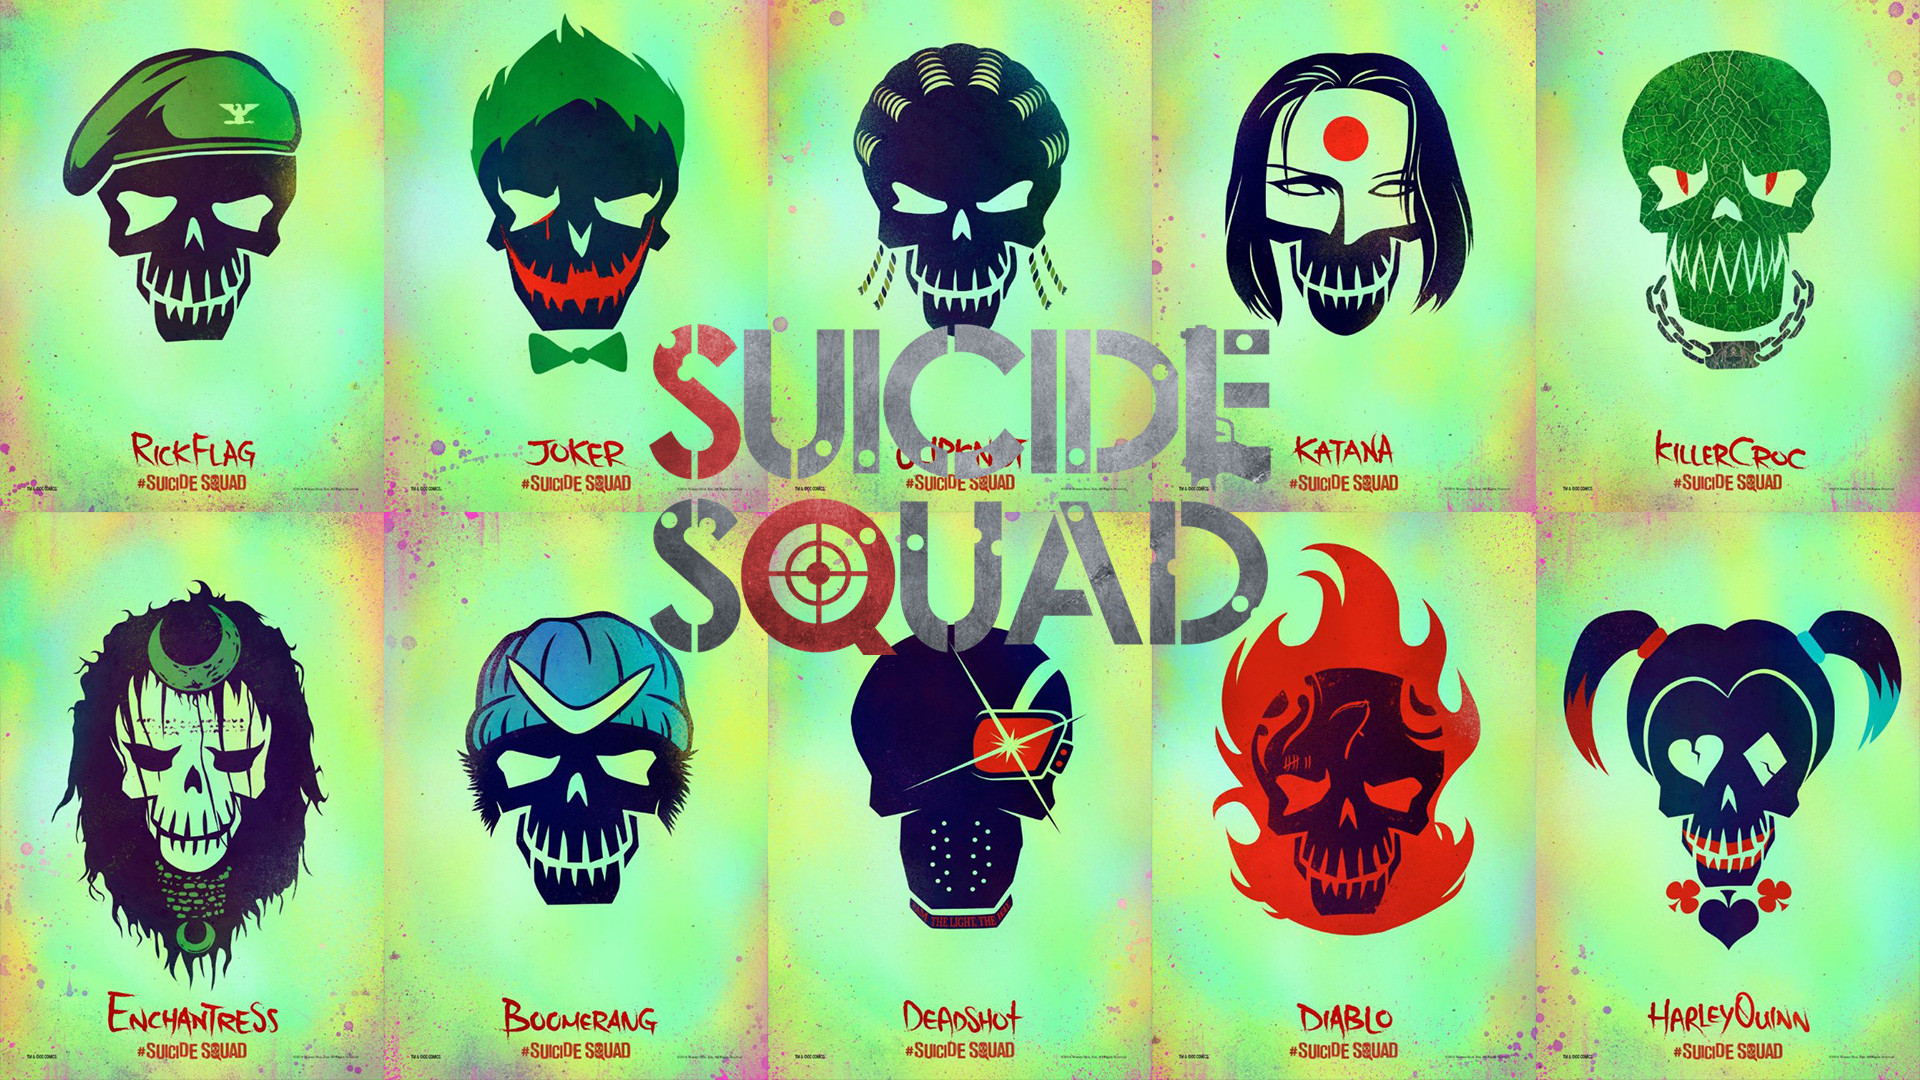 Suicide Squad movie wallpaper hd Free HD Wallpapers, Images, Stock